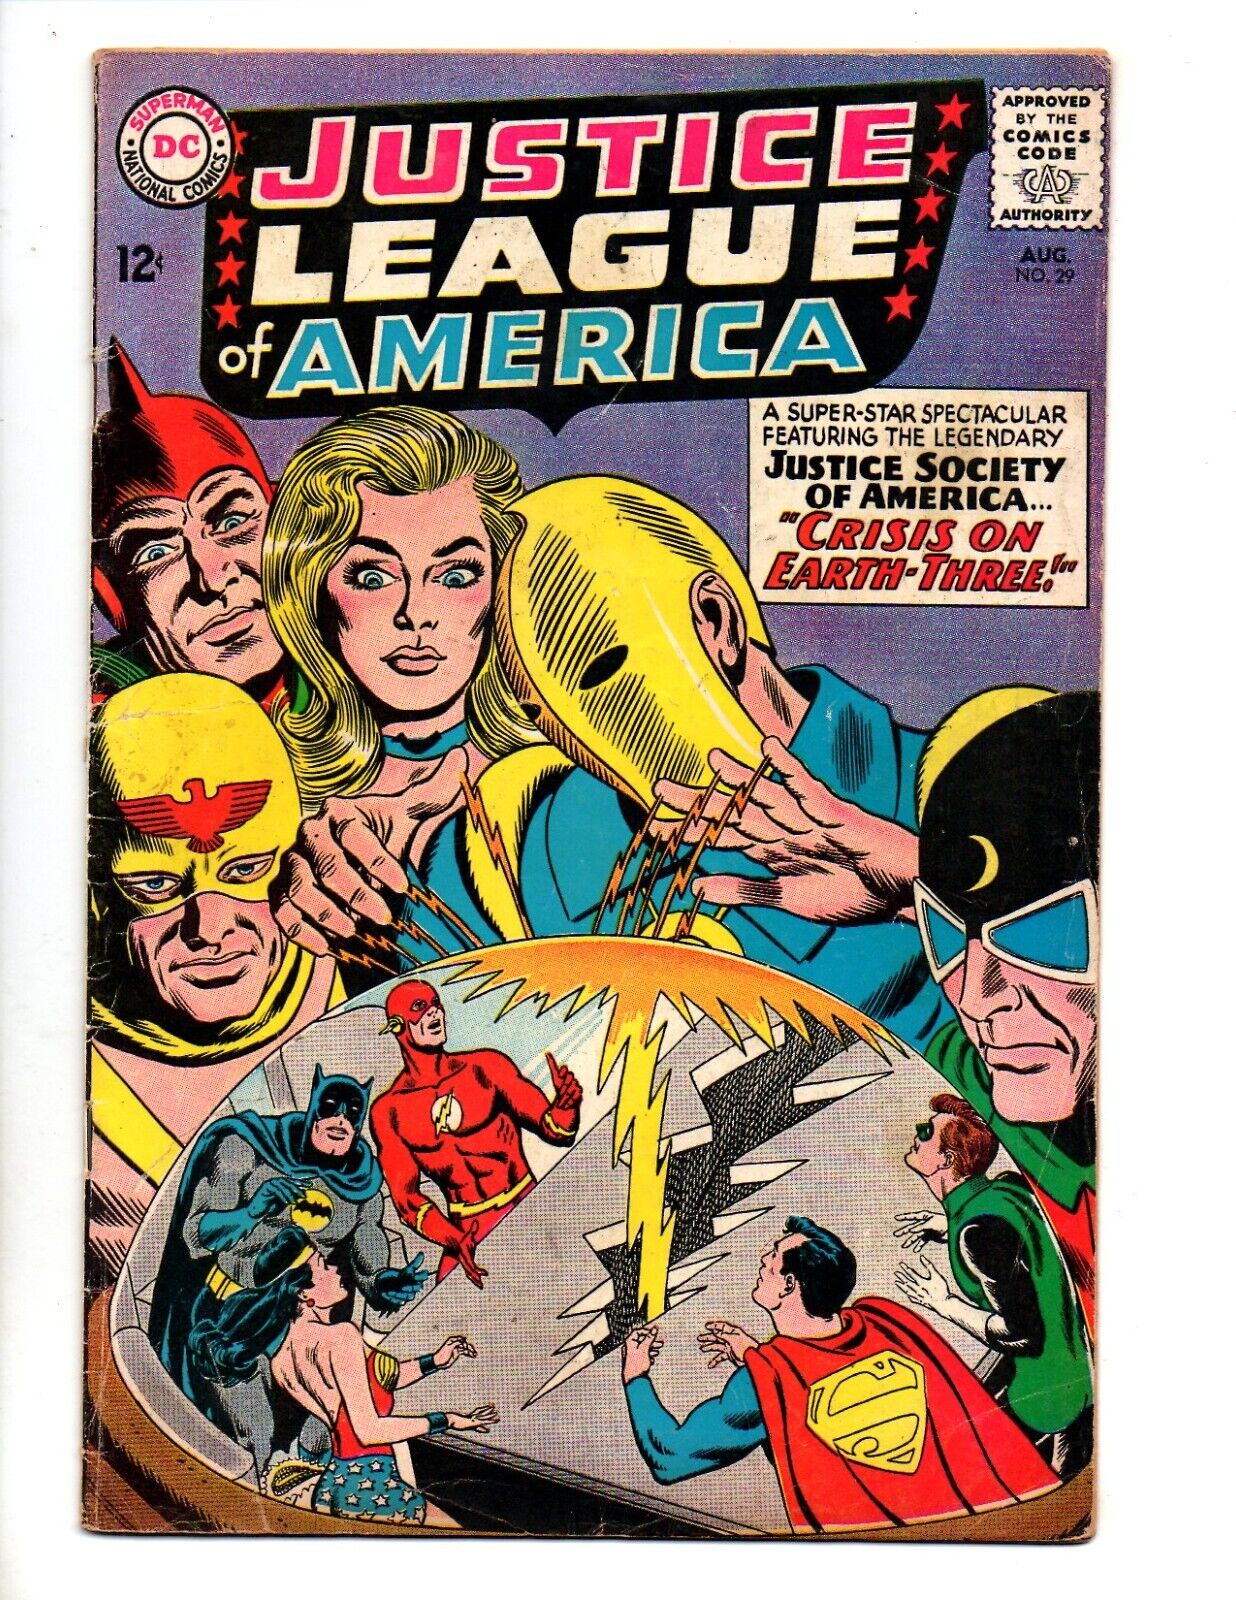 JUSTICE LEAGUE OF AMERICA #29  VG 4.0  